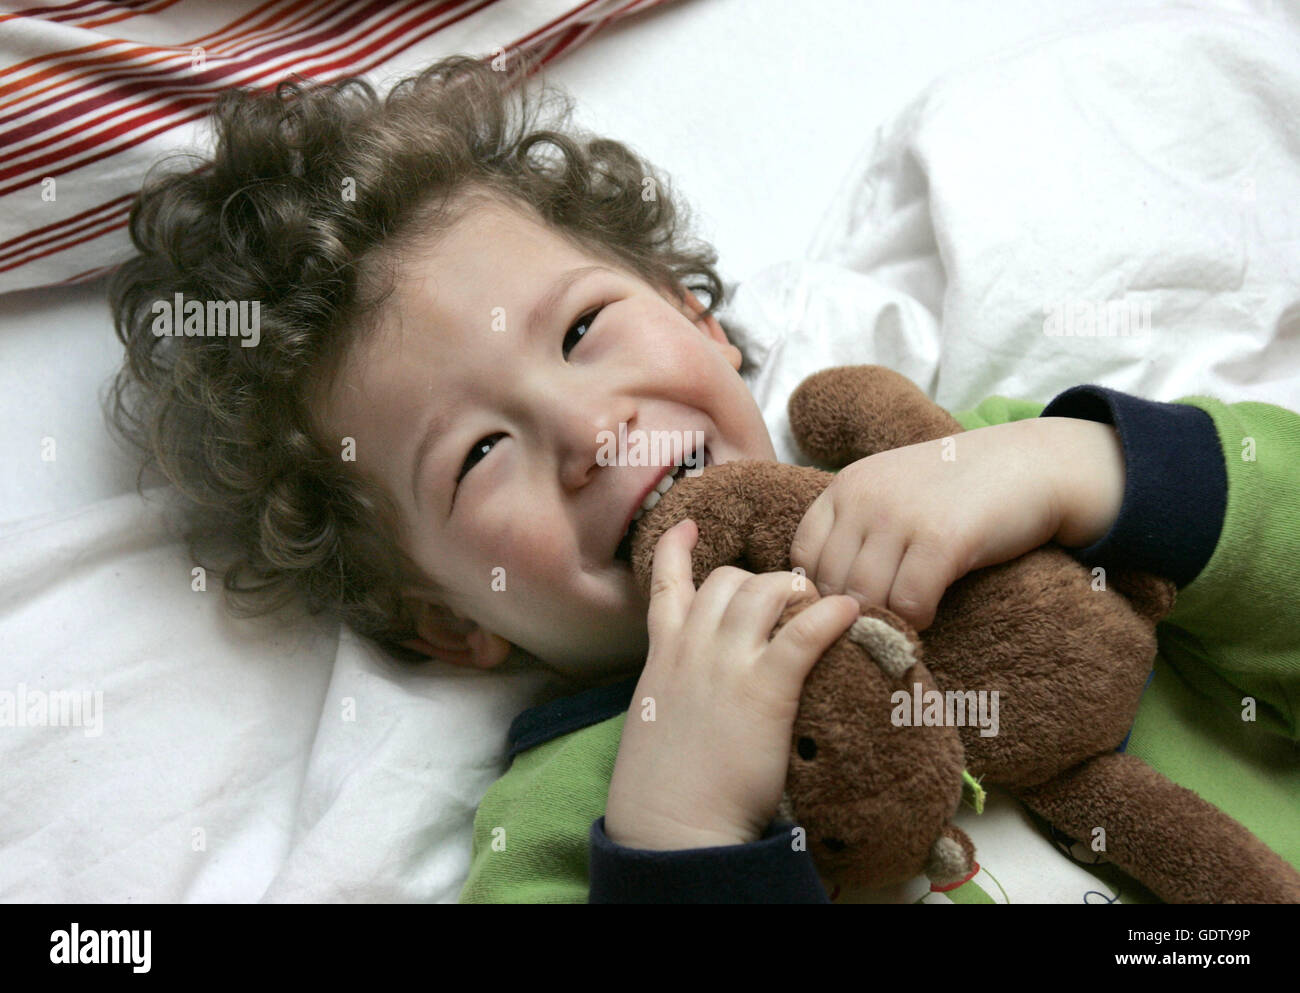 Laughing boy with stuffed animal Stock Photo